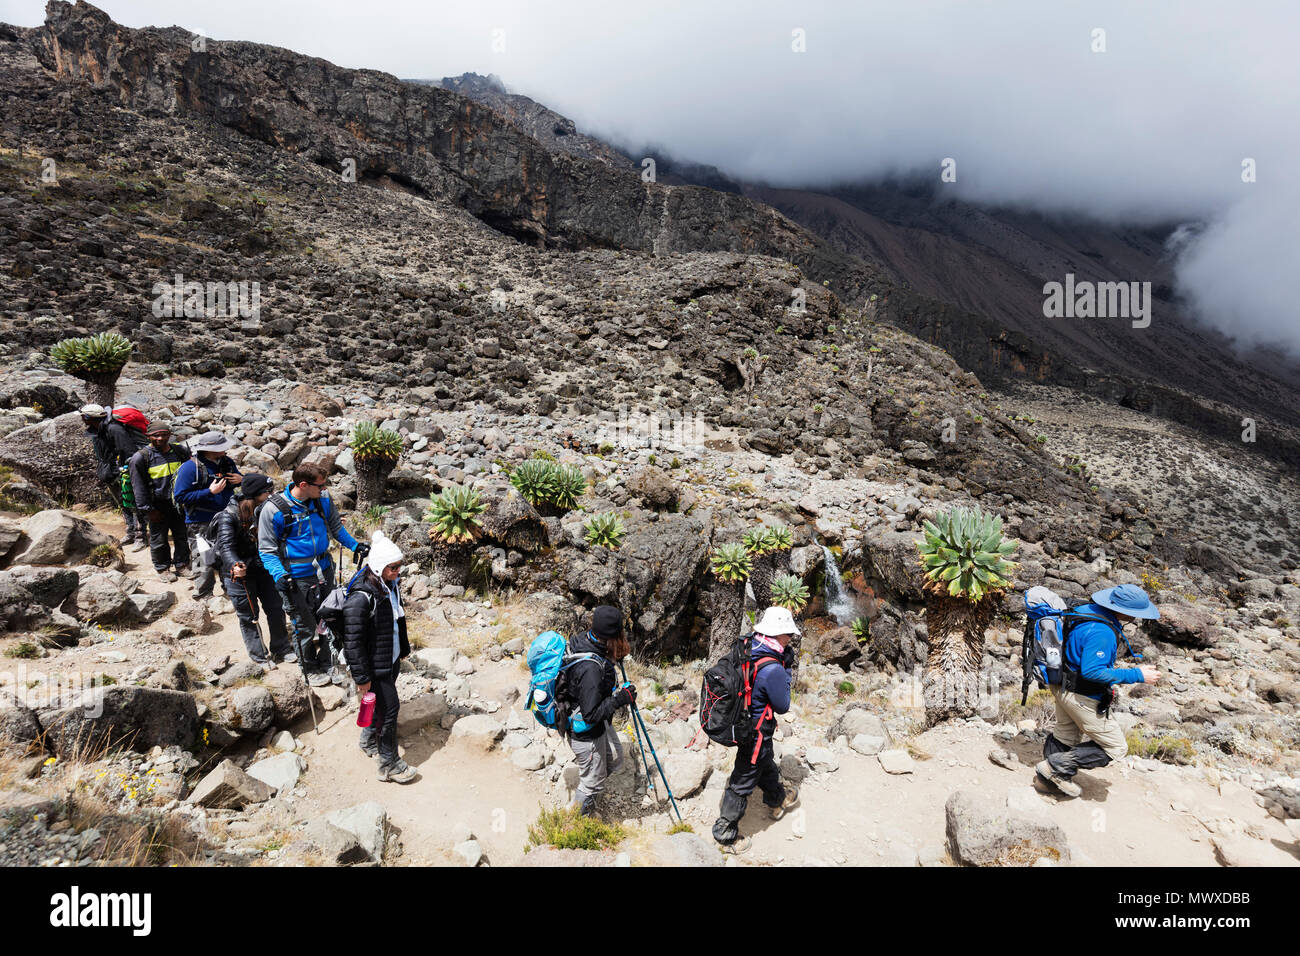 Hikers on a trail, Kilimanjaro National Park, UNESCO World Heritage Site, Tanzania, East Africa, Africa Stock Photo